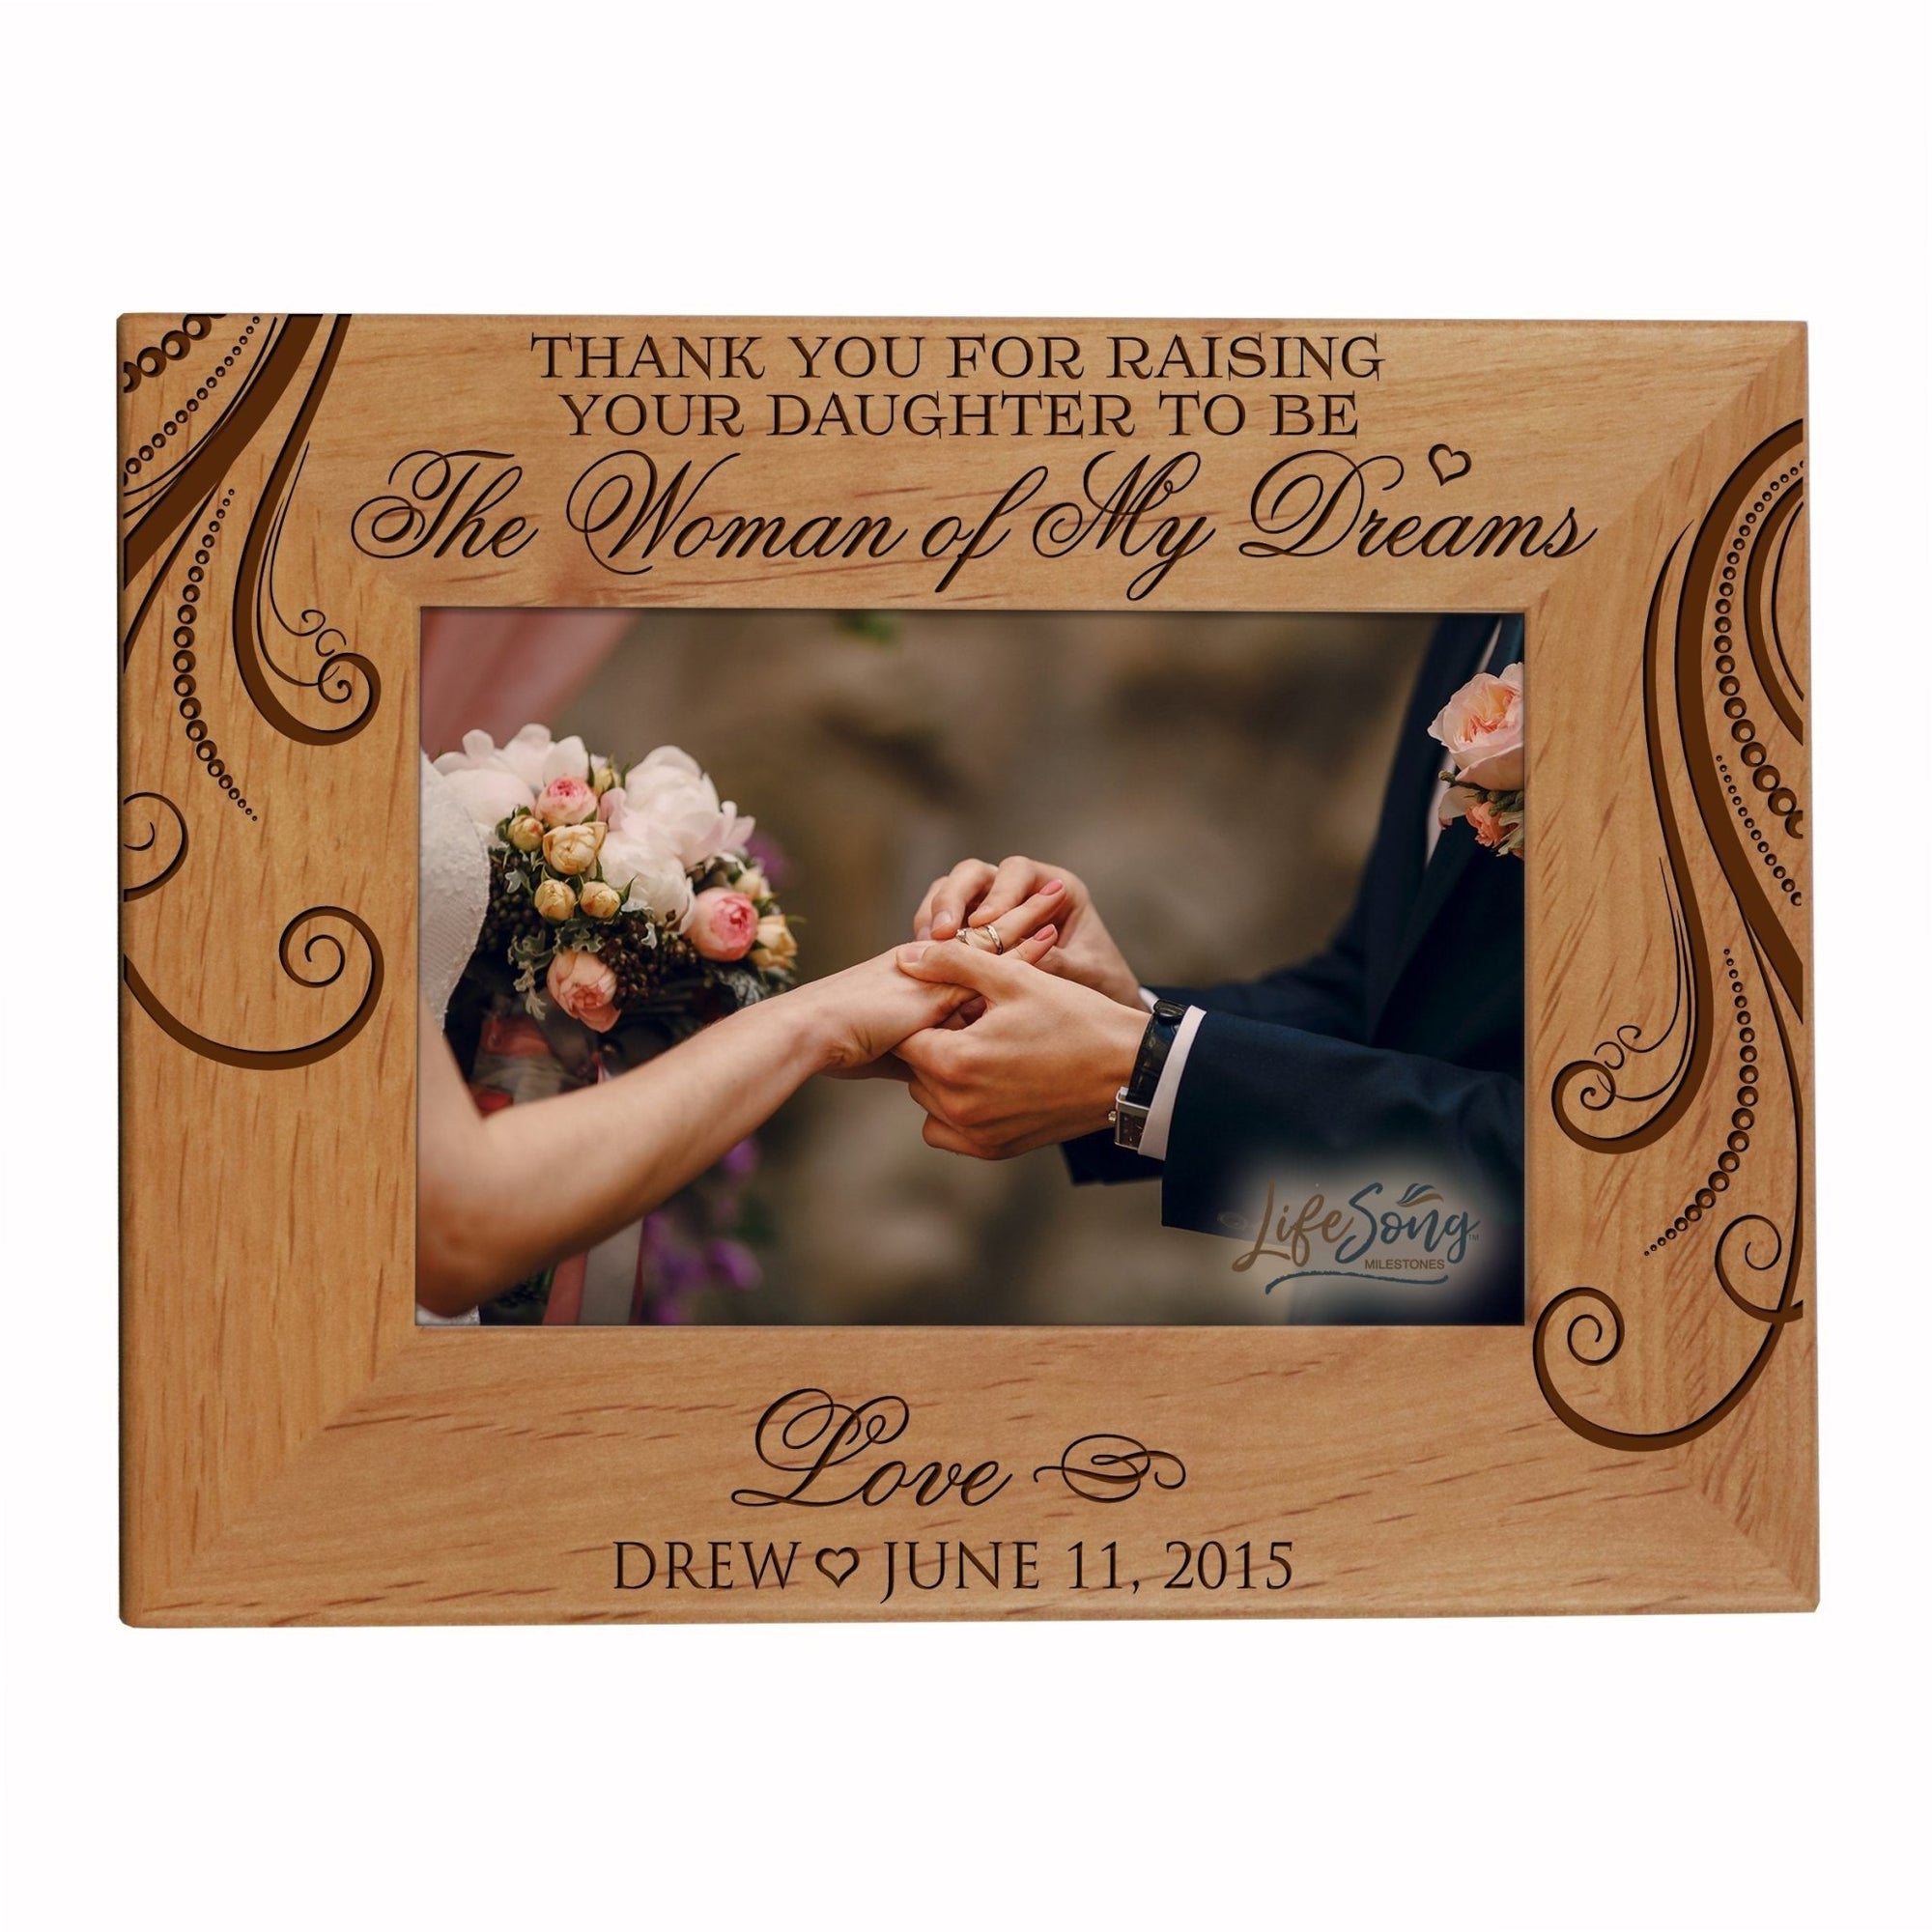 Personalized Wooden Marriage Picture Frames - Woman of my Dreams - LifeSong Milestones